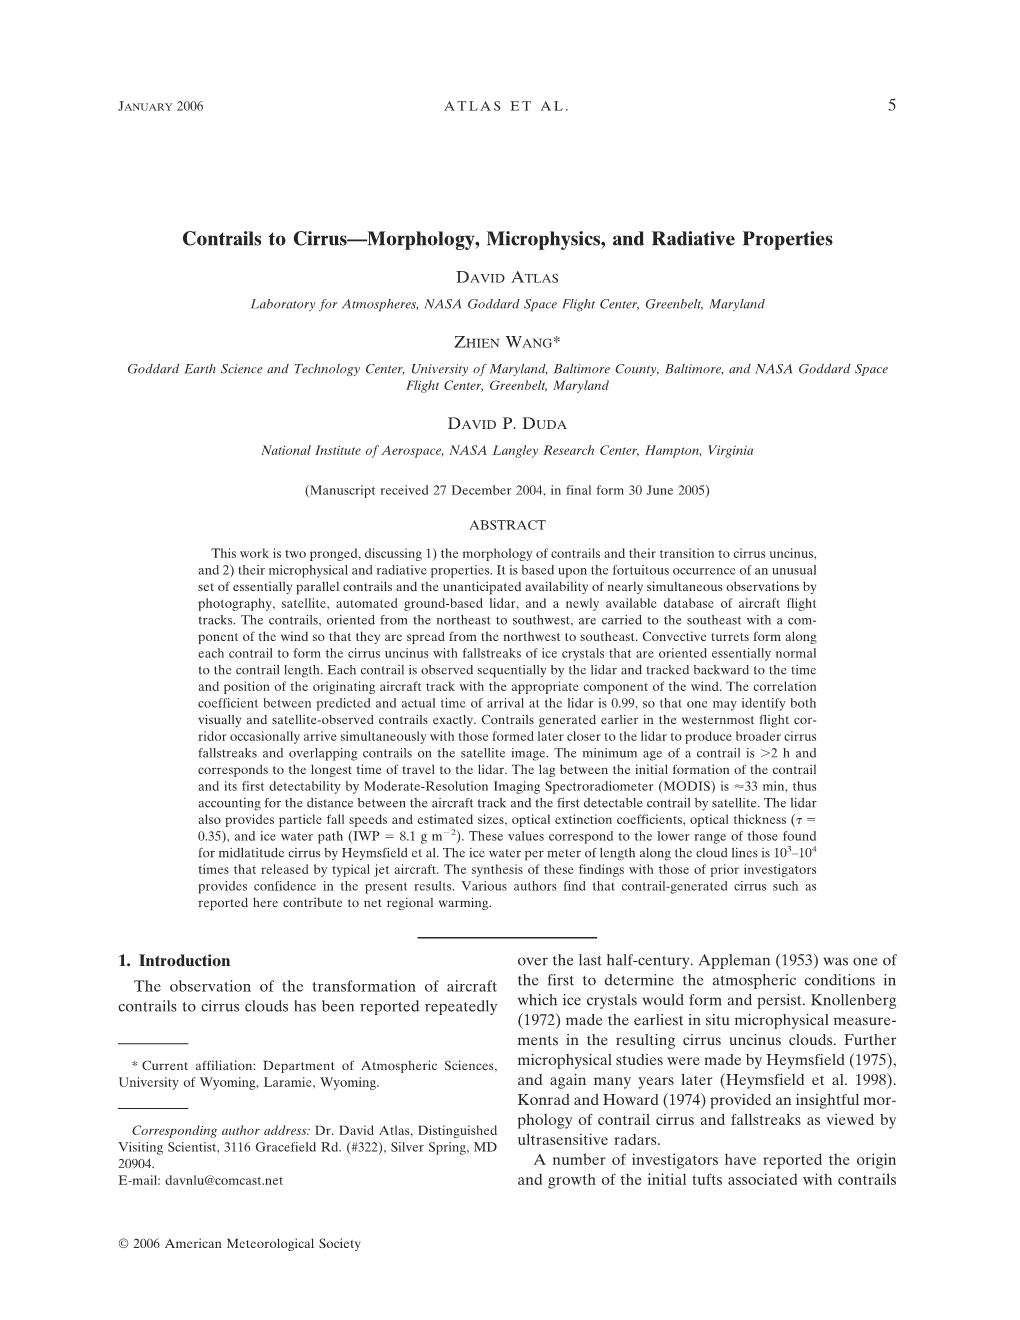 Contrails to Cirrus—Morphology, Microphysics, and Radiative Properties